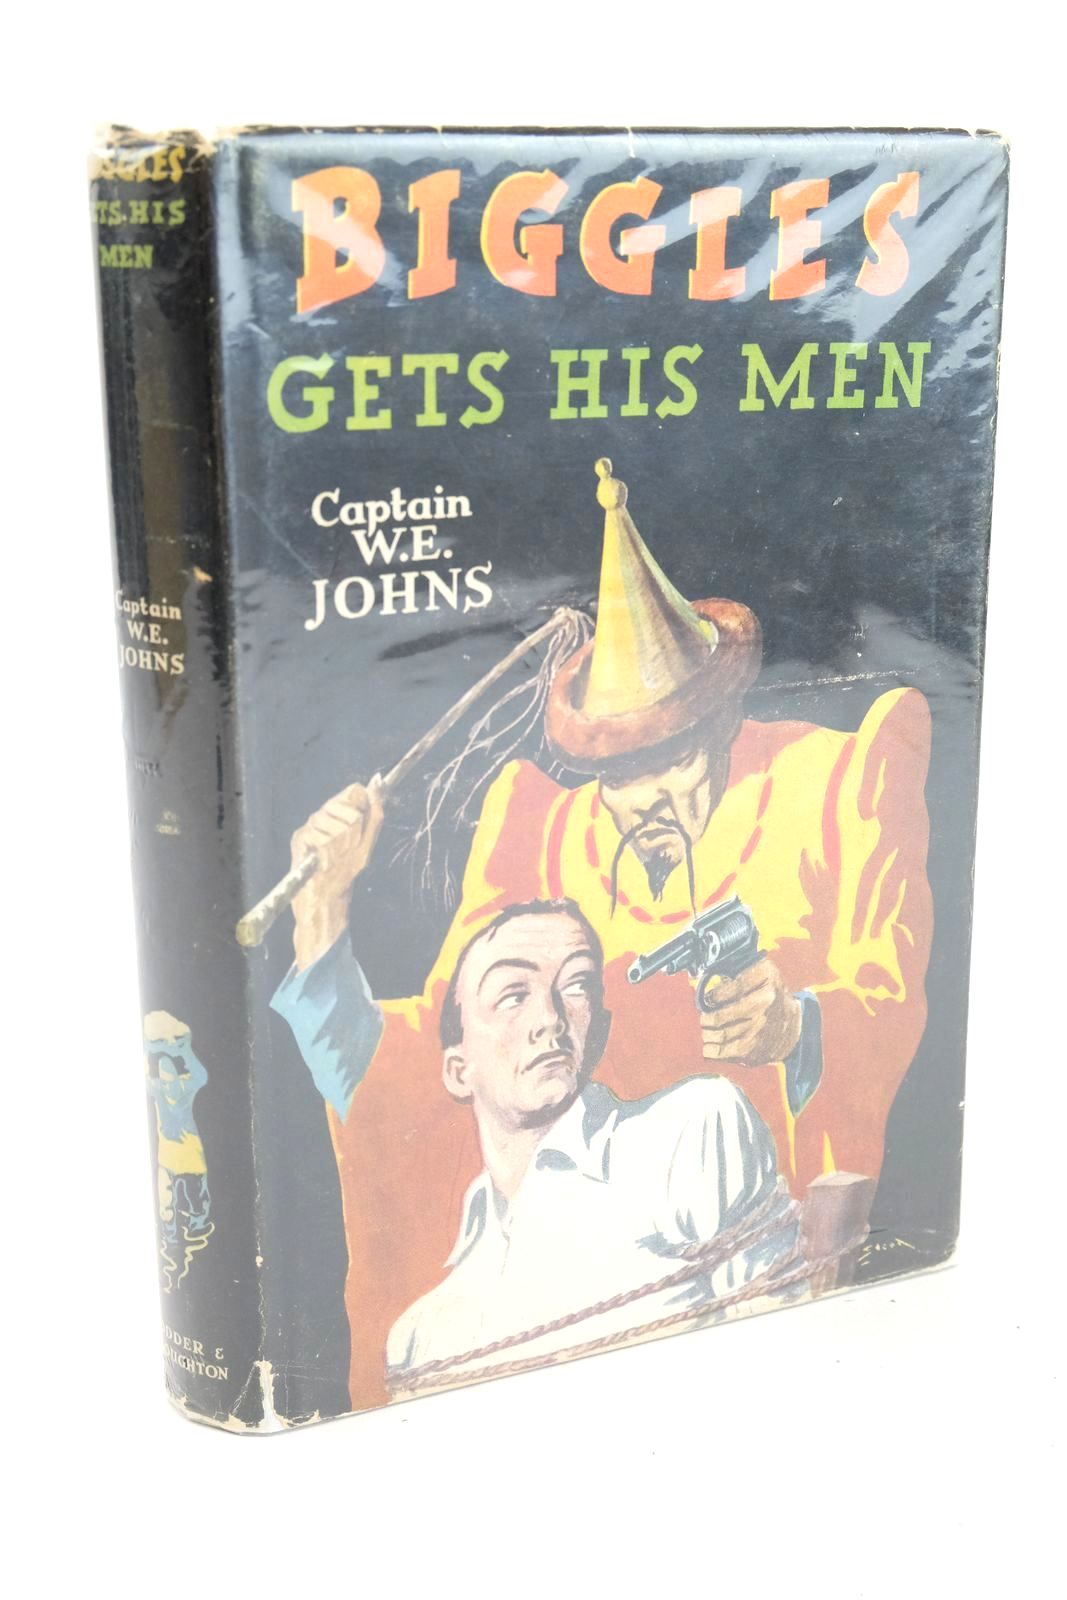 Photo of BIGGLES GETS HIS MEN written by Johns, W.E. illustrated by Stead,  published by Hodder & Stoughton (STOCK CODE: 1325713)  for sale by Stella & Rose's Books